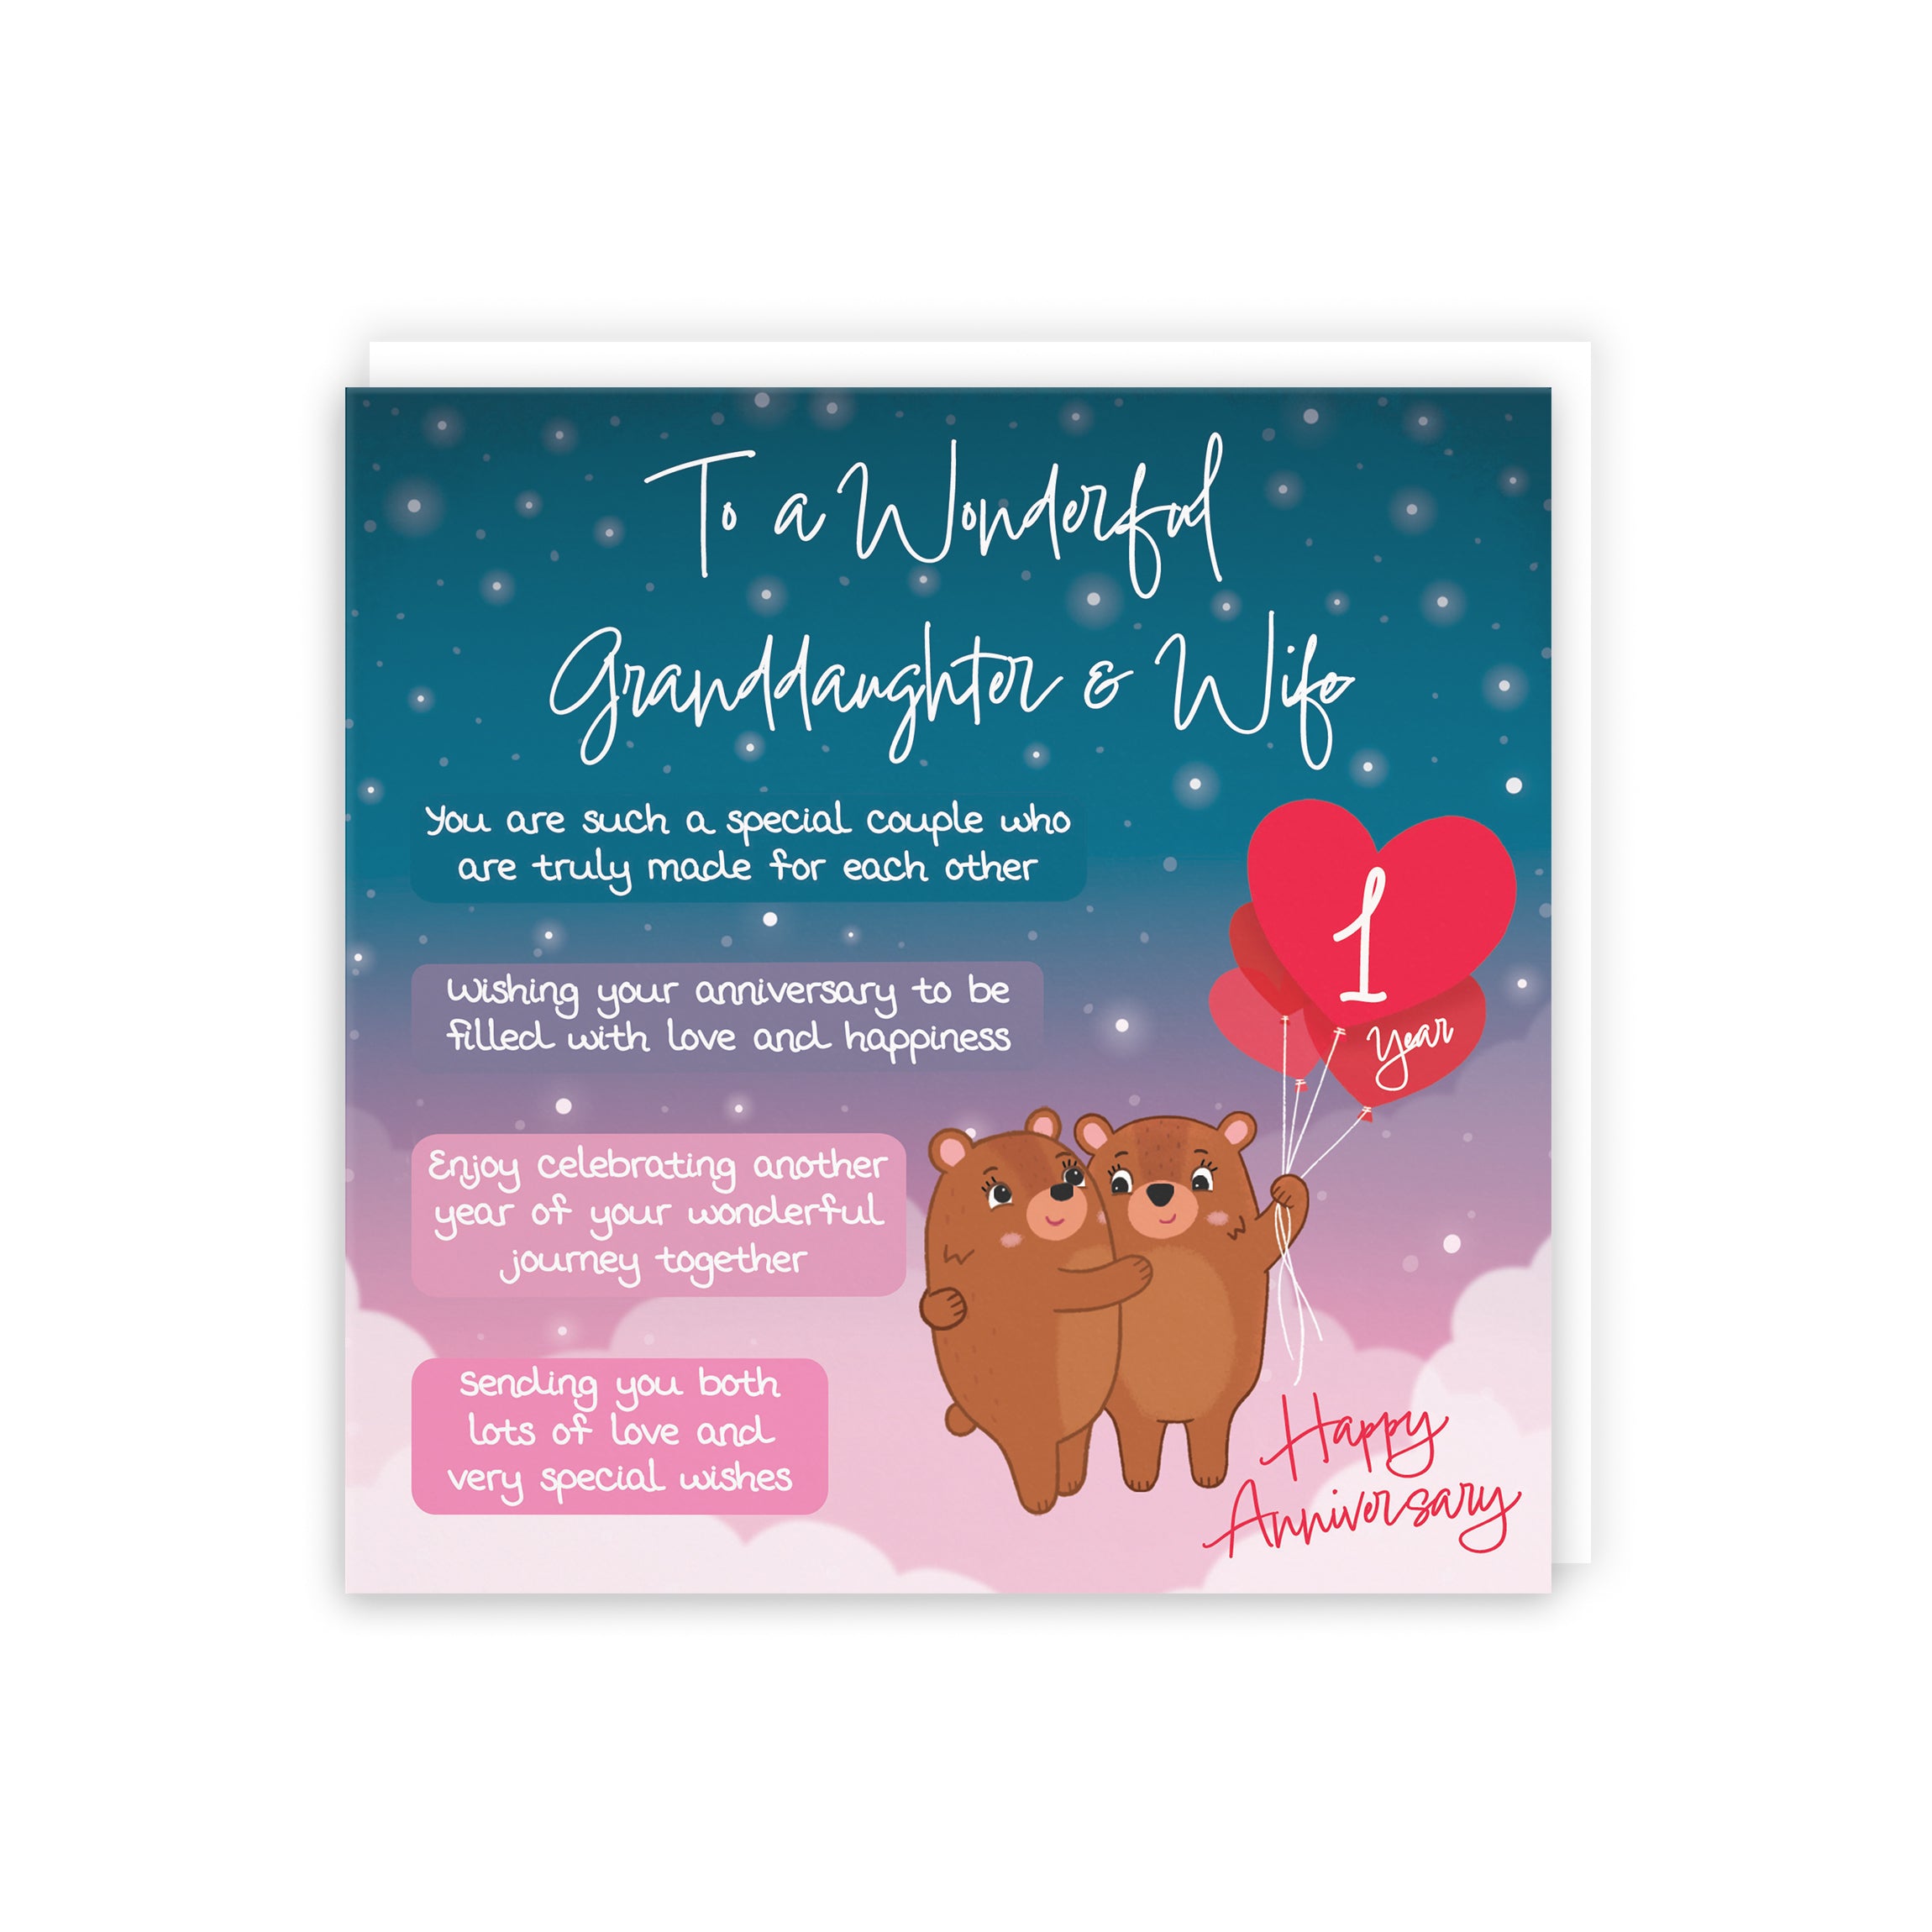 Granddaughter And Wife 1st Anniversary Card Starry Night Cute Bears